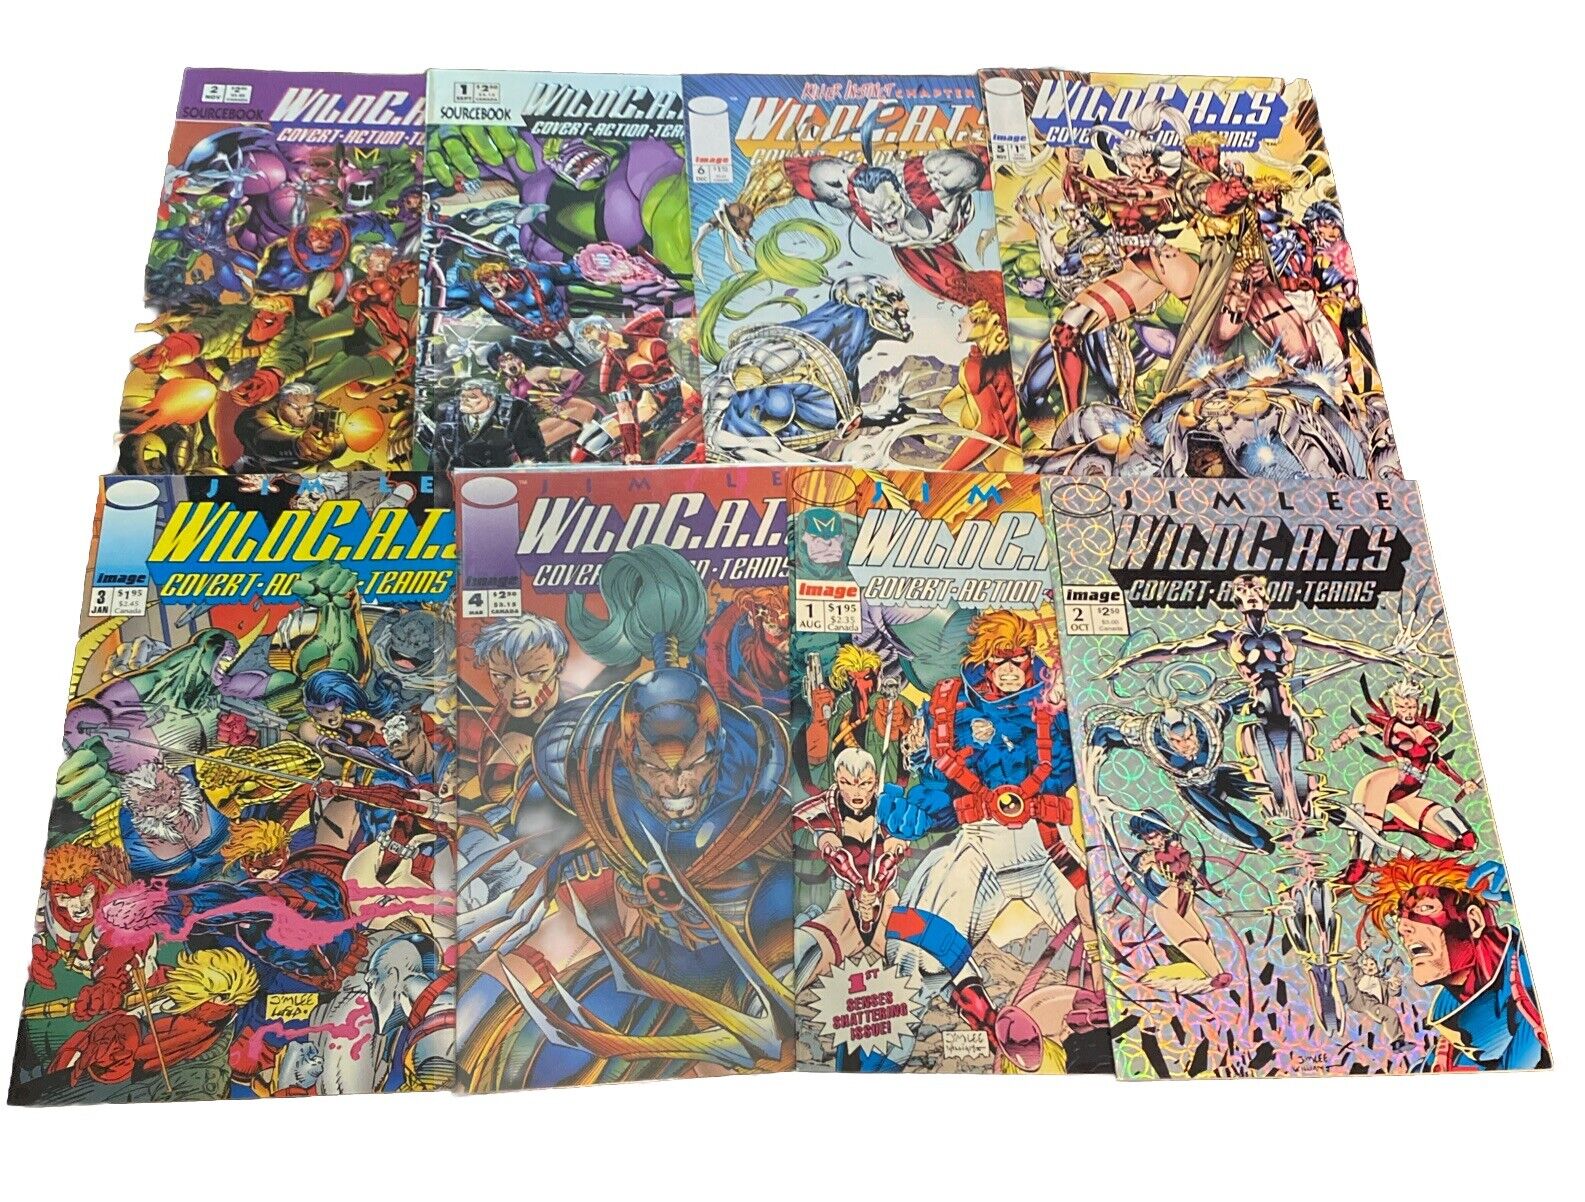 WILDC.A.T.S Covert Action Teams #1-6 Sourcebook # 1 2 (lot of 8) (Image 1992)